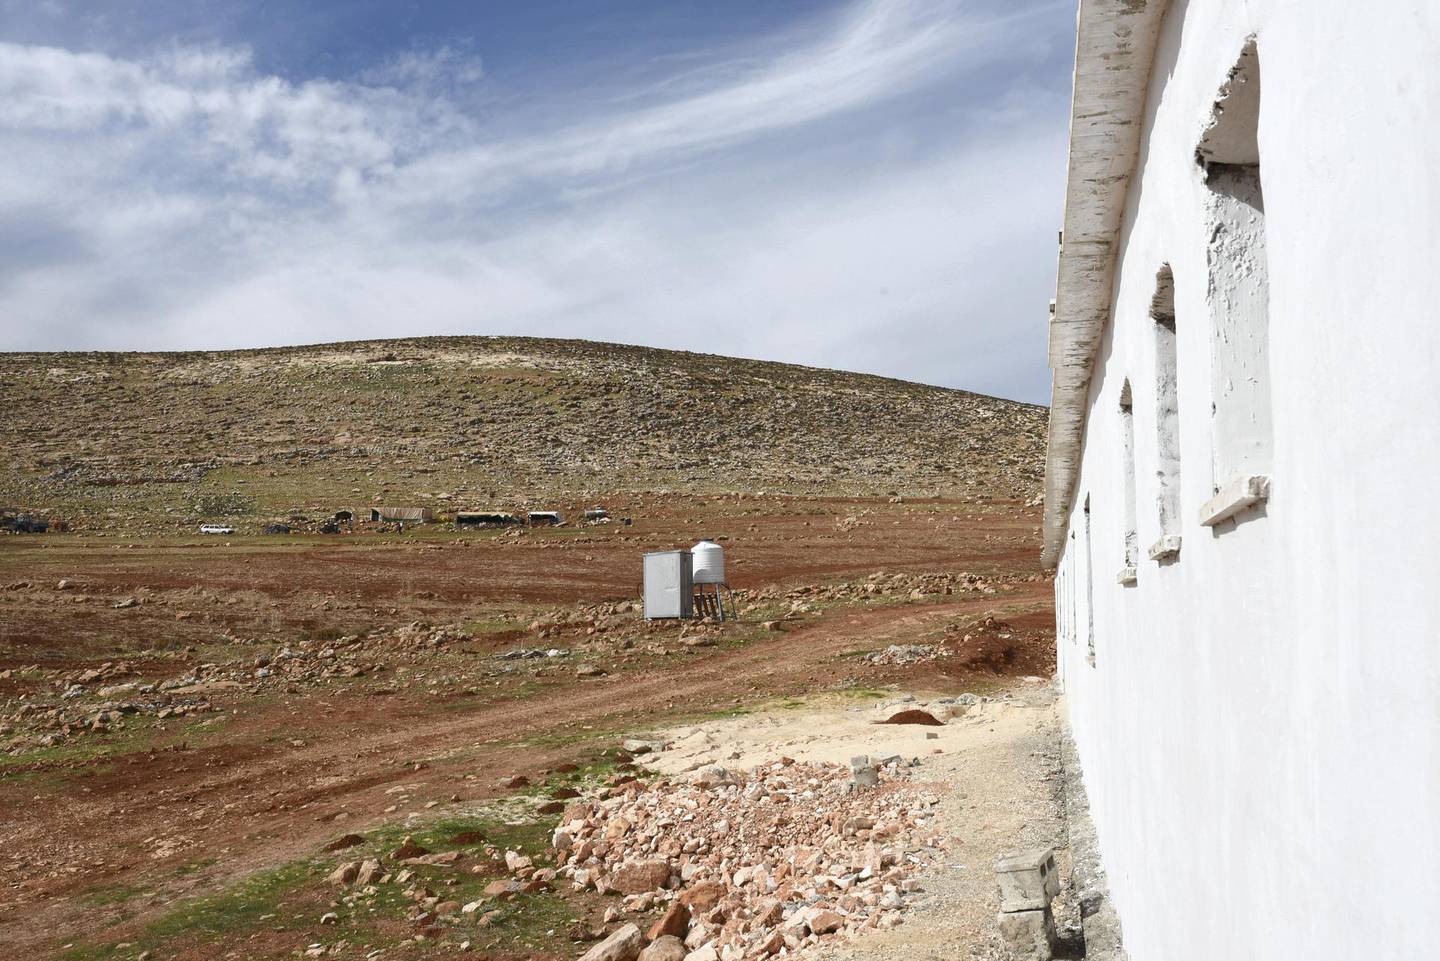 A hut close to the school serves as the teacher's toilet. A bathroom for the pupils remains unfinished and the school currently lacks running water, in Ras a-Tin, north-east of Ramallah in the occupied West Bank. Rose Scammell for The National